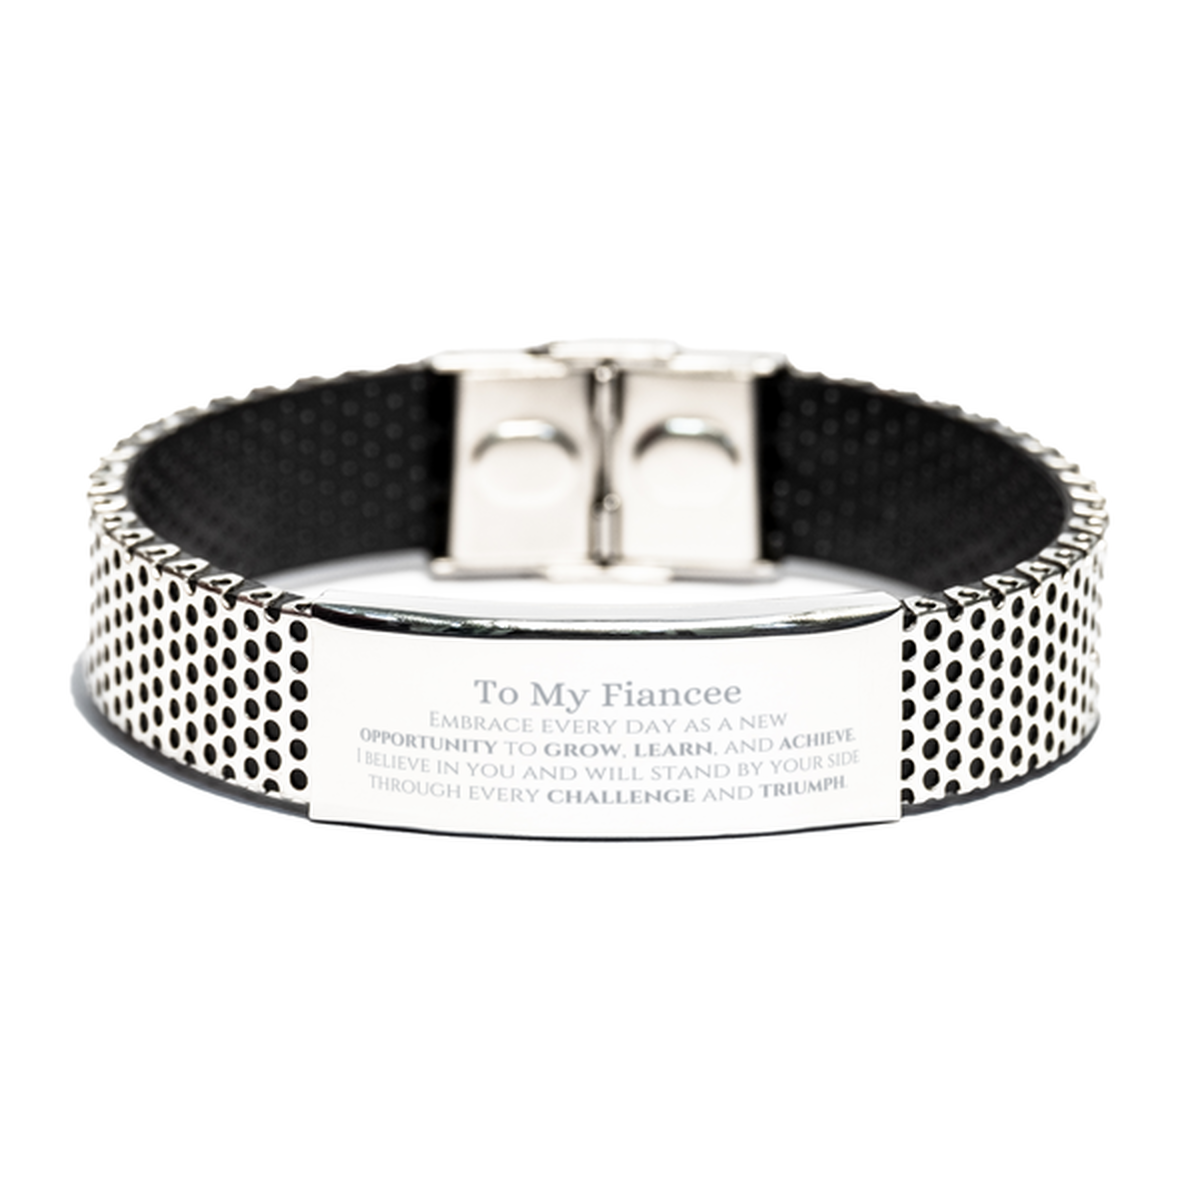 To My Fiancee Gifts, I believe in you and will stand by your side, Inspirational Stainless Steel Bracelet For Fiancee, Birthday Christmas Motivational Fiancee Gifts